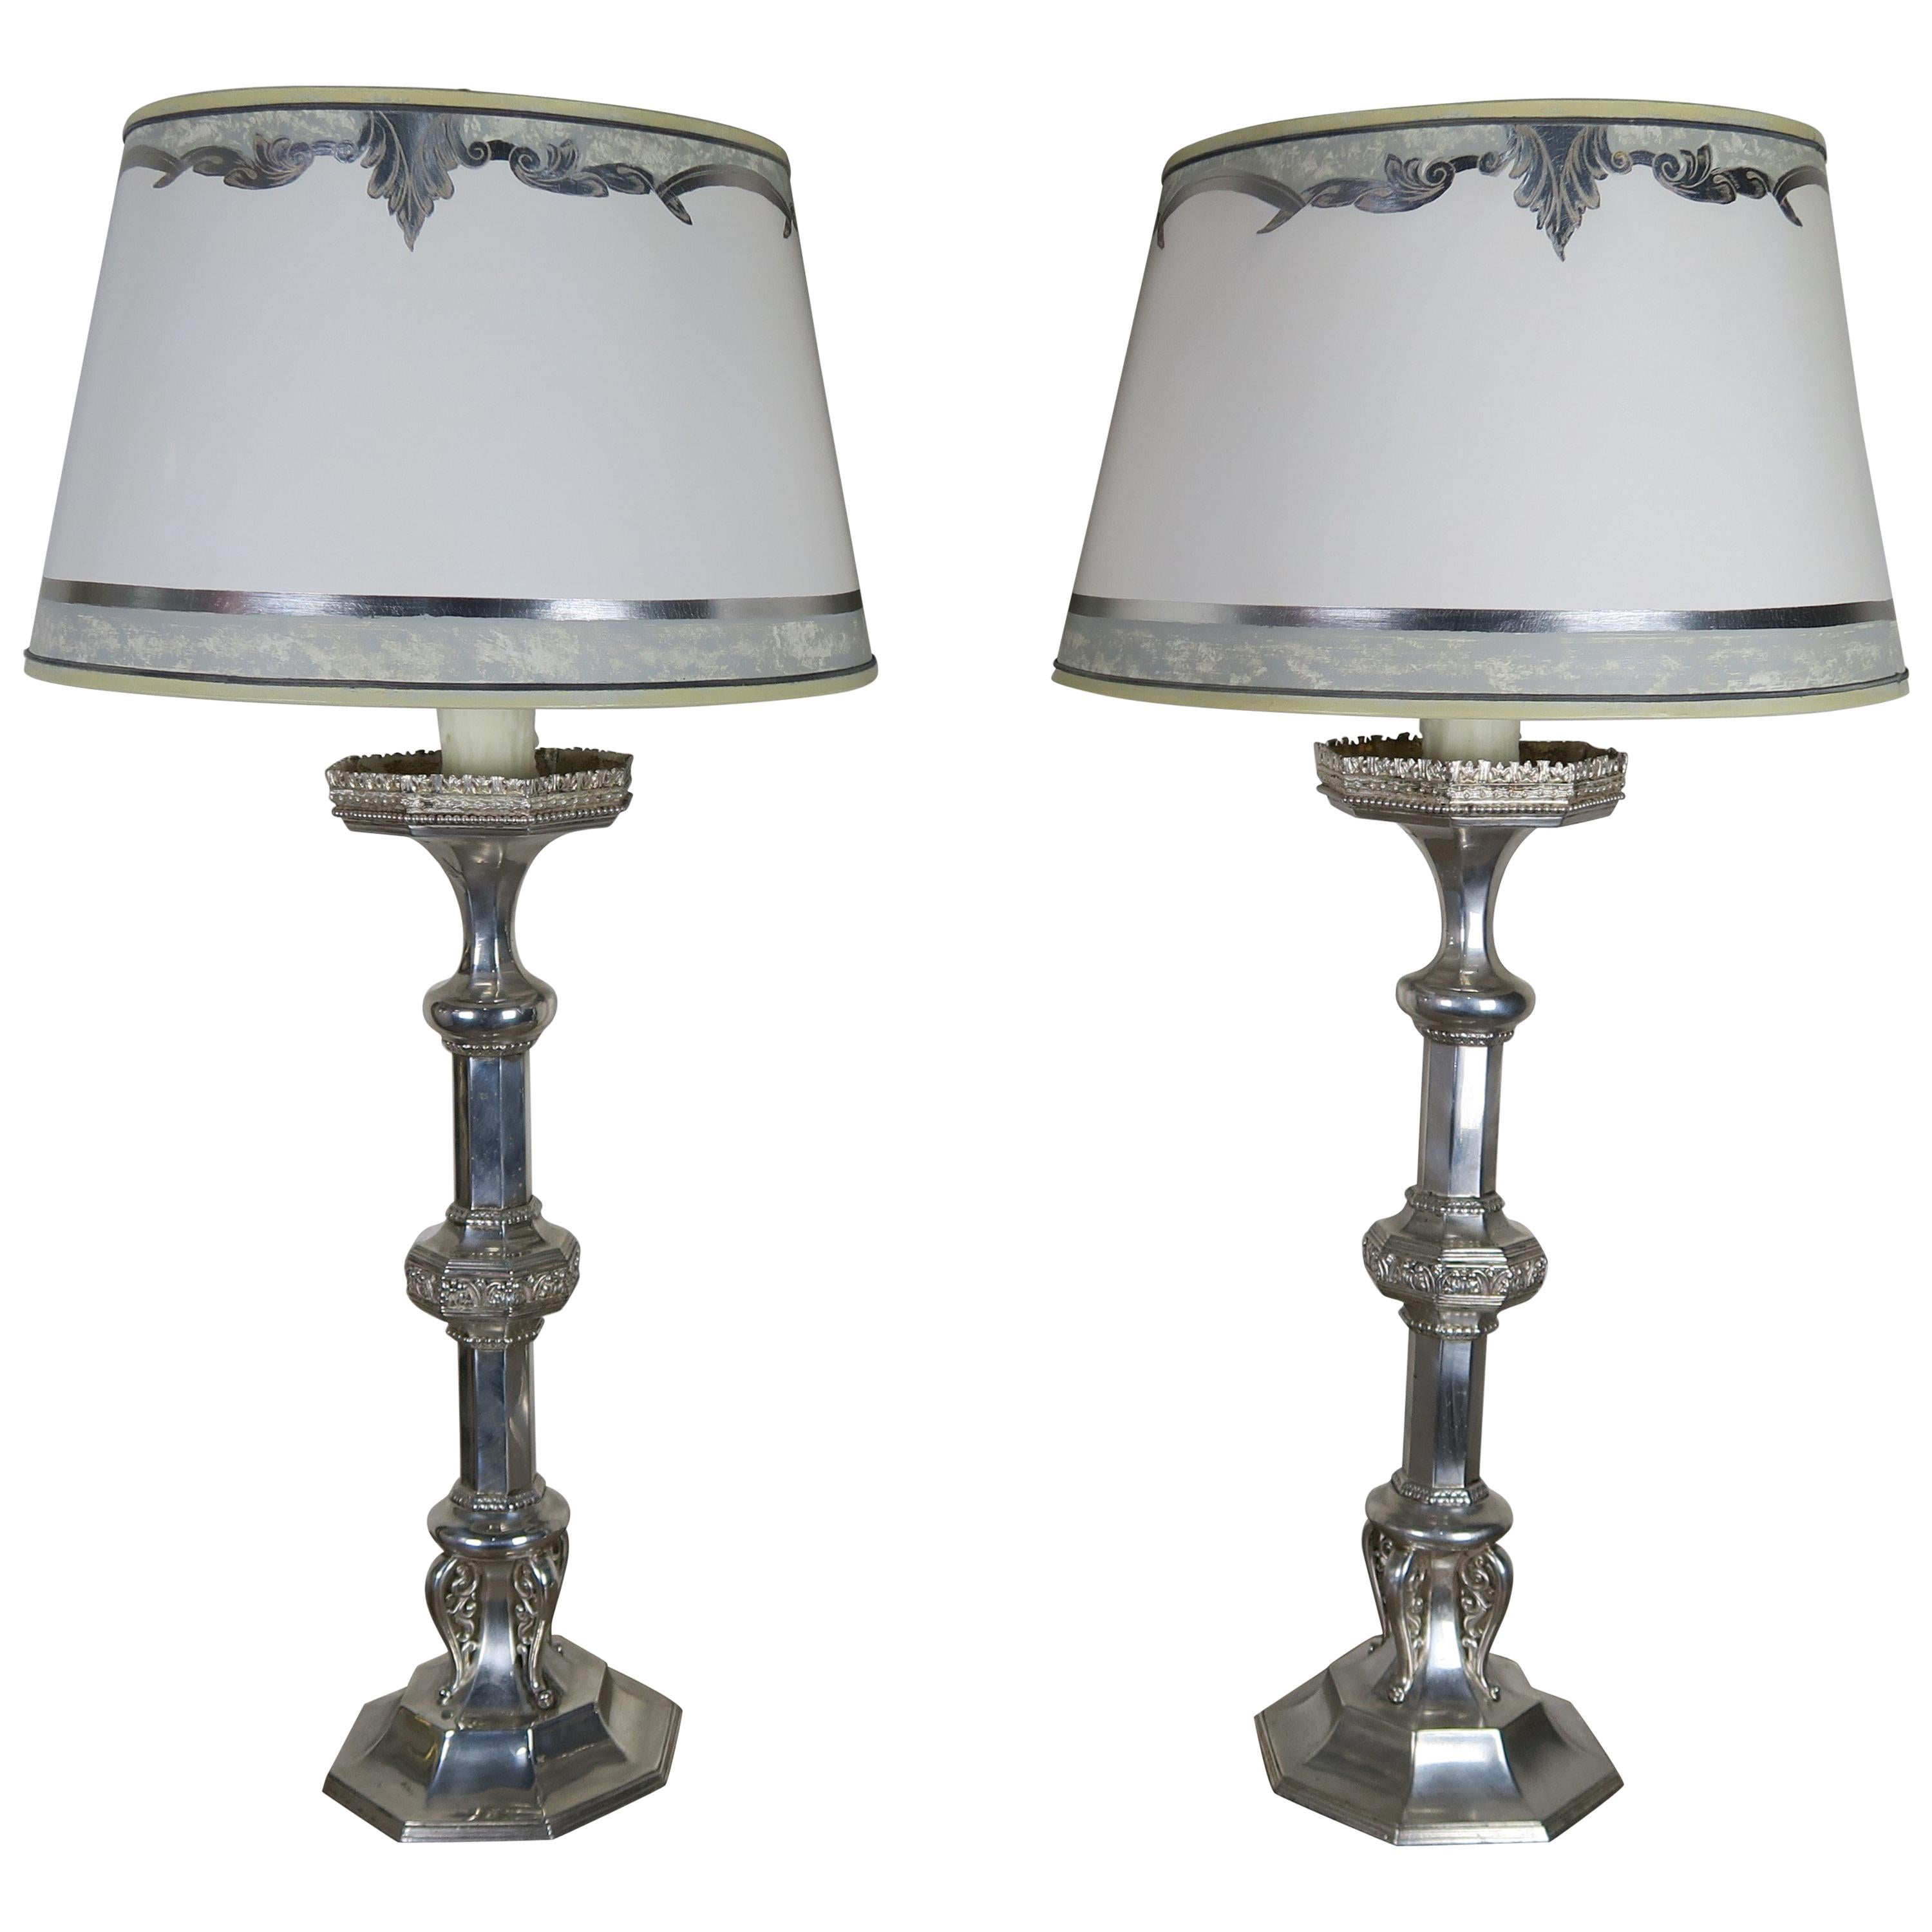 Pair of English Sheffield Silver Plated Lamps with Custom Parchment Shades